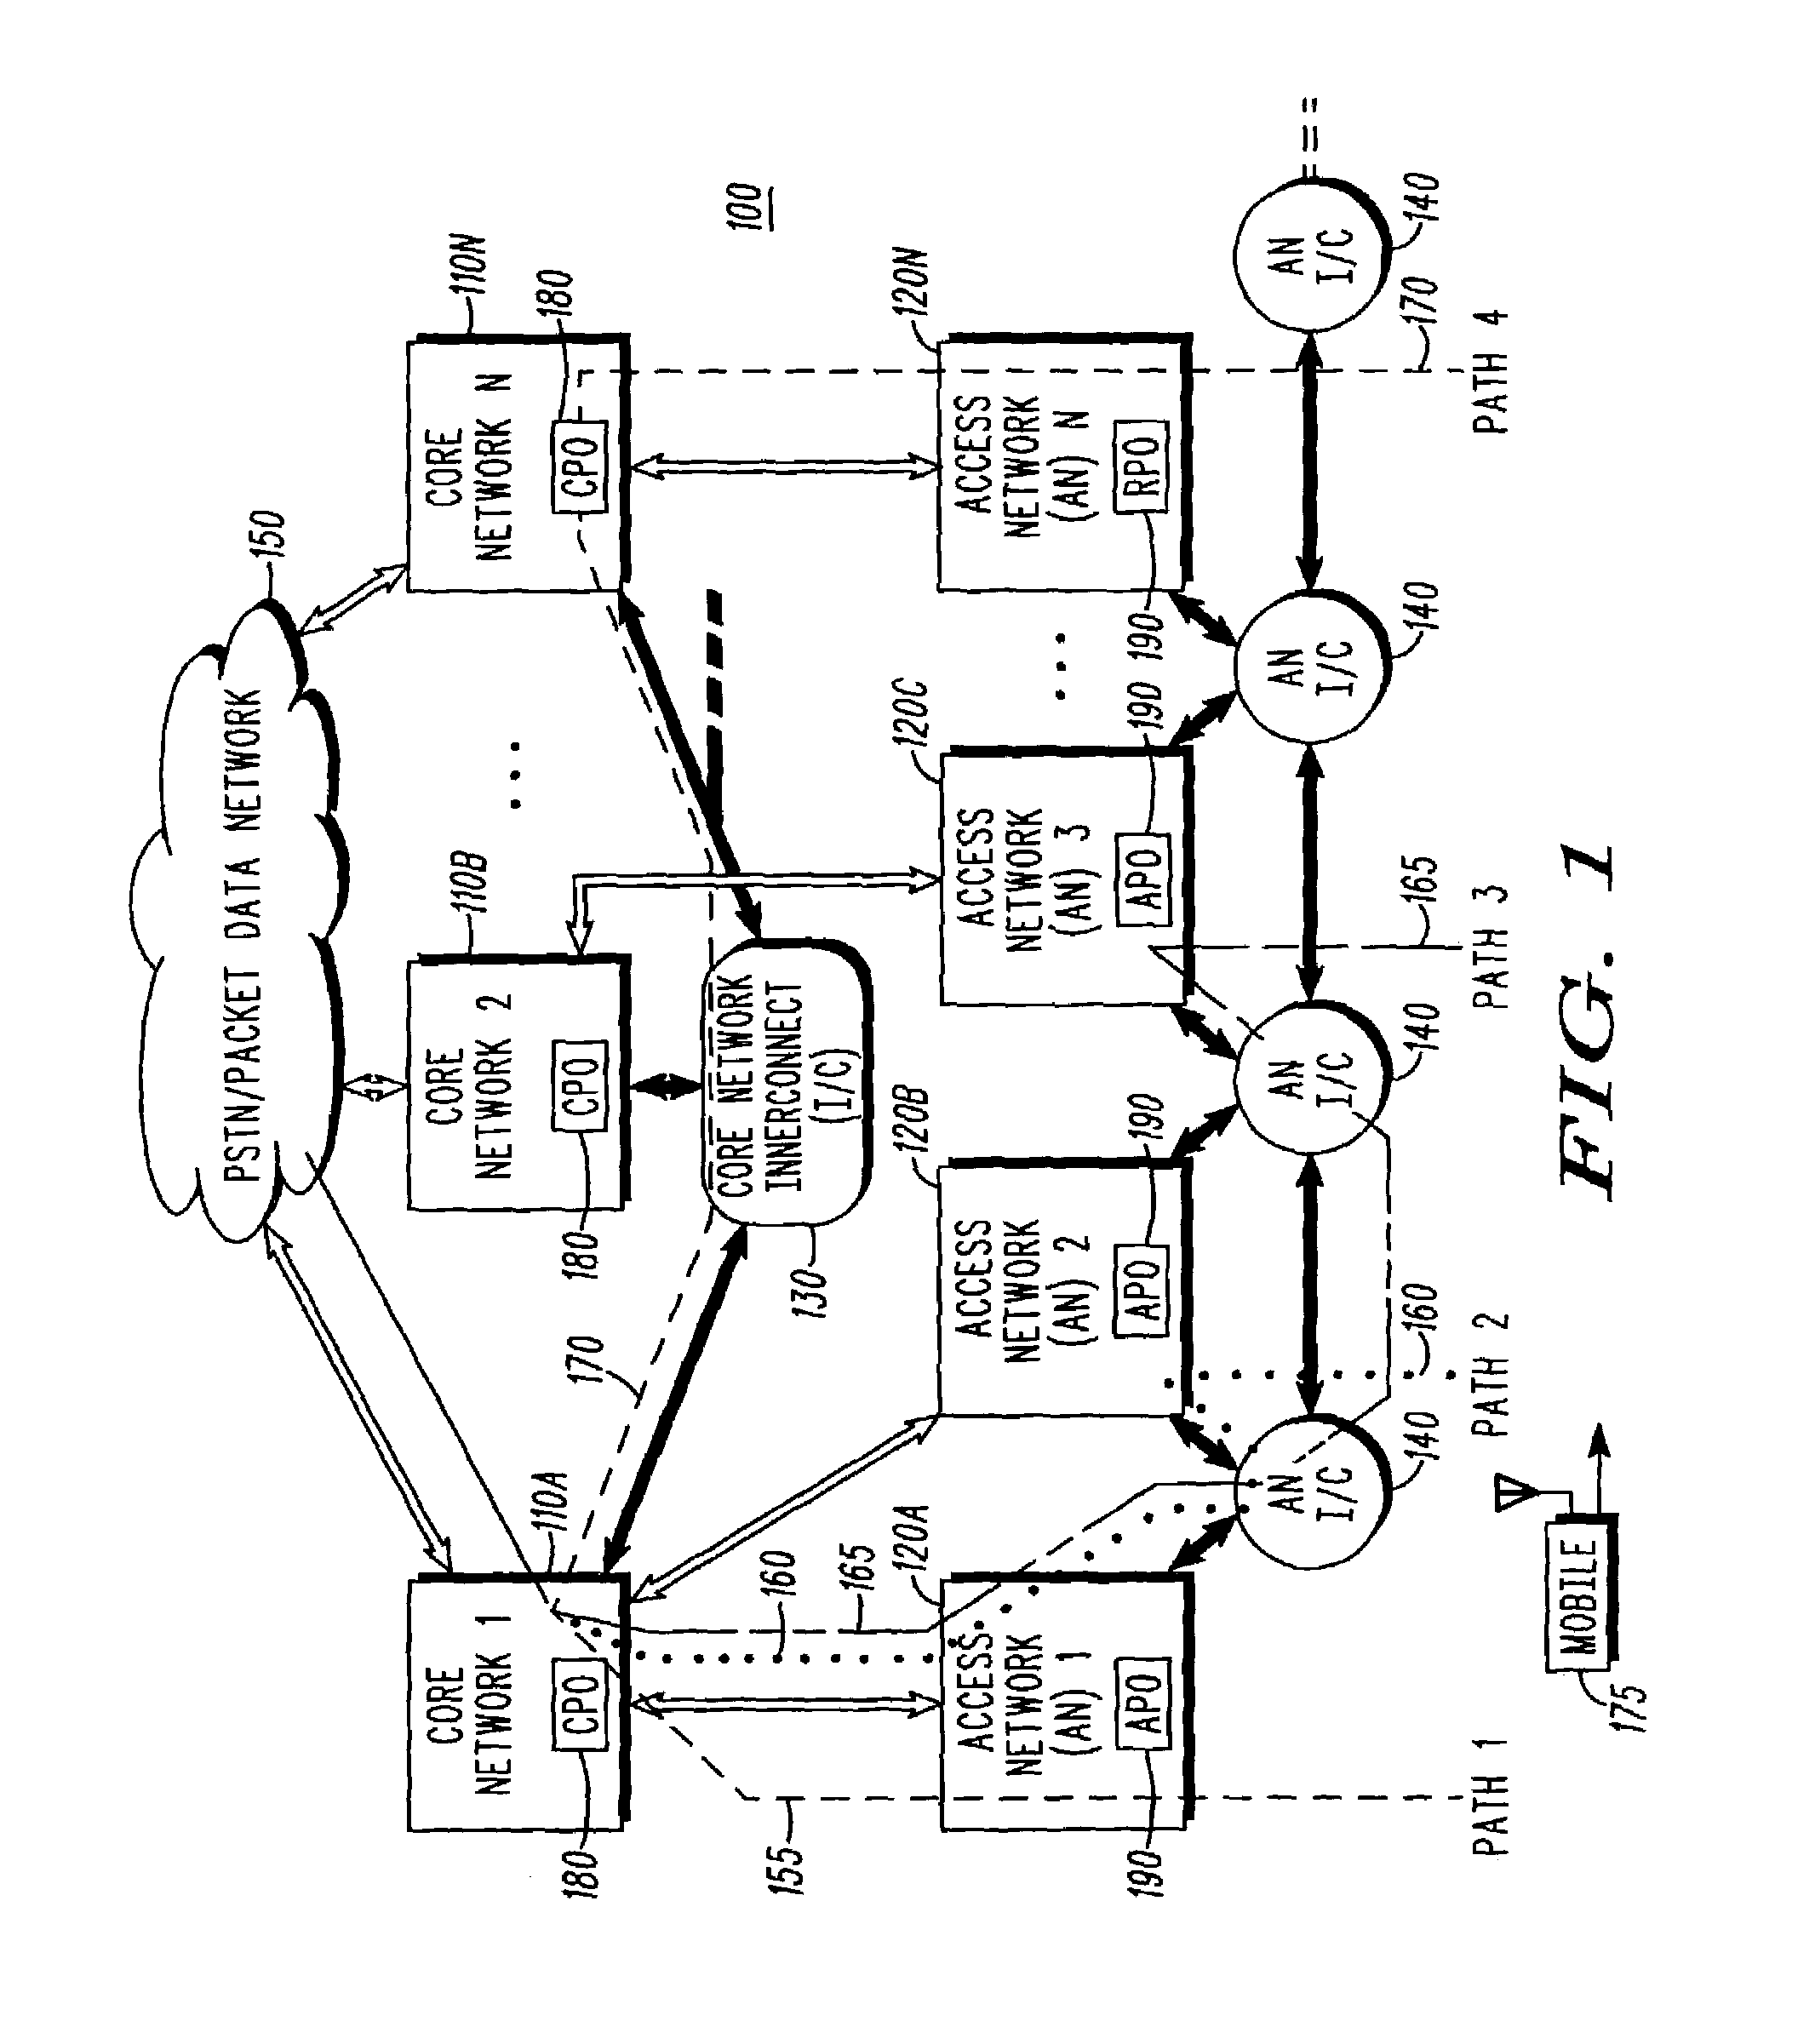 Segmented and distributed path optimization in a communication network